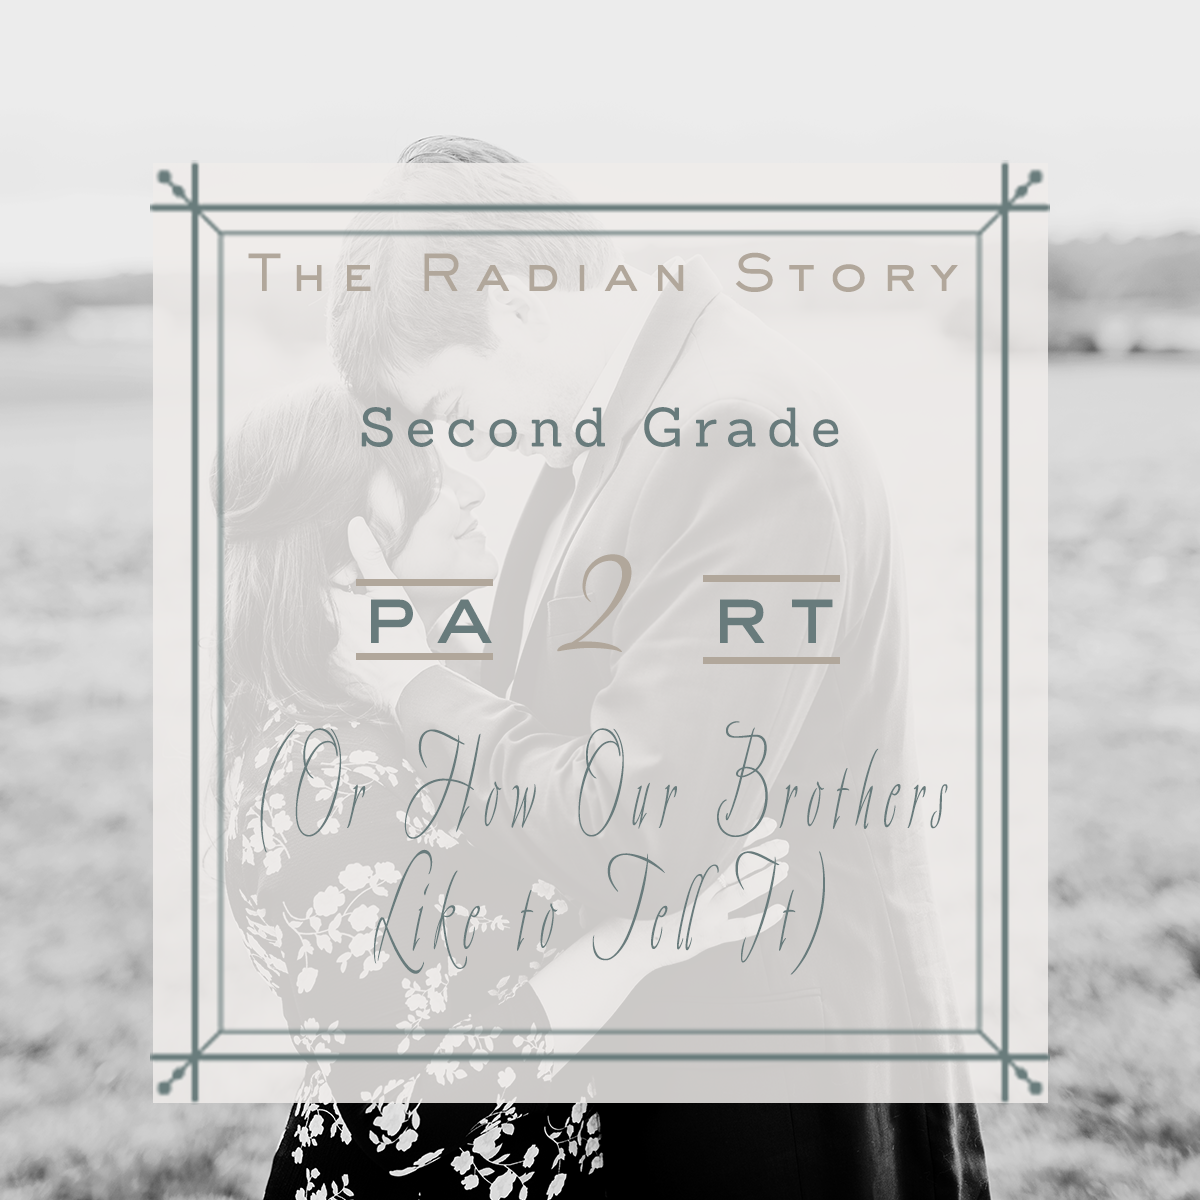 The Radian Story